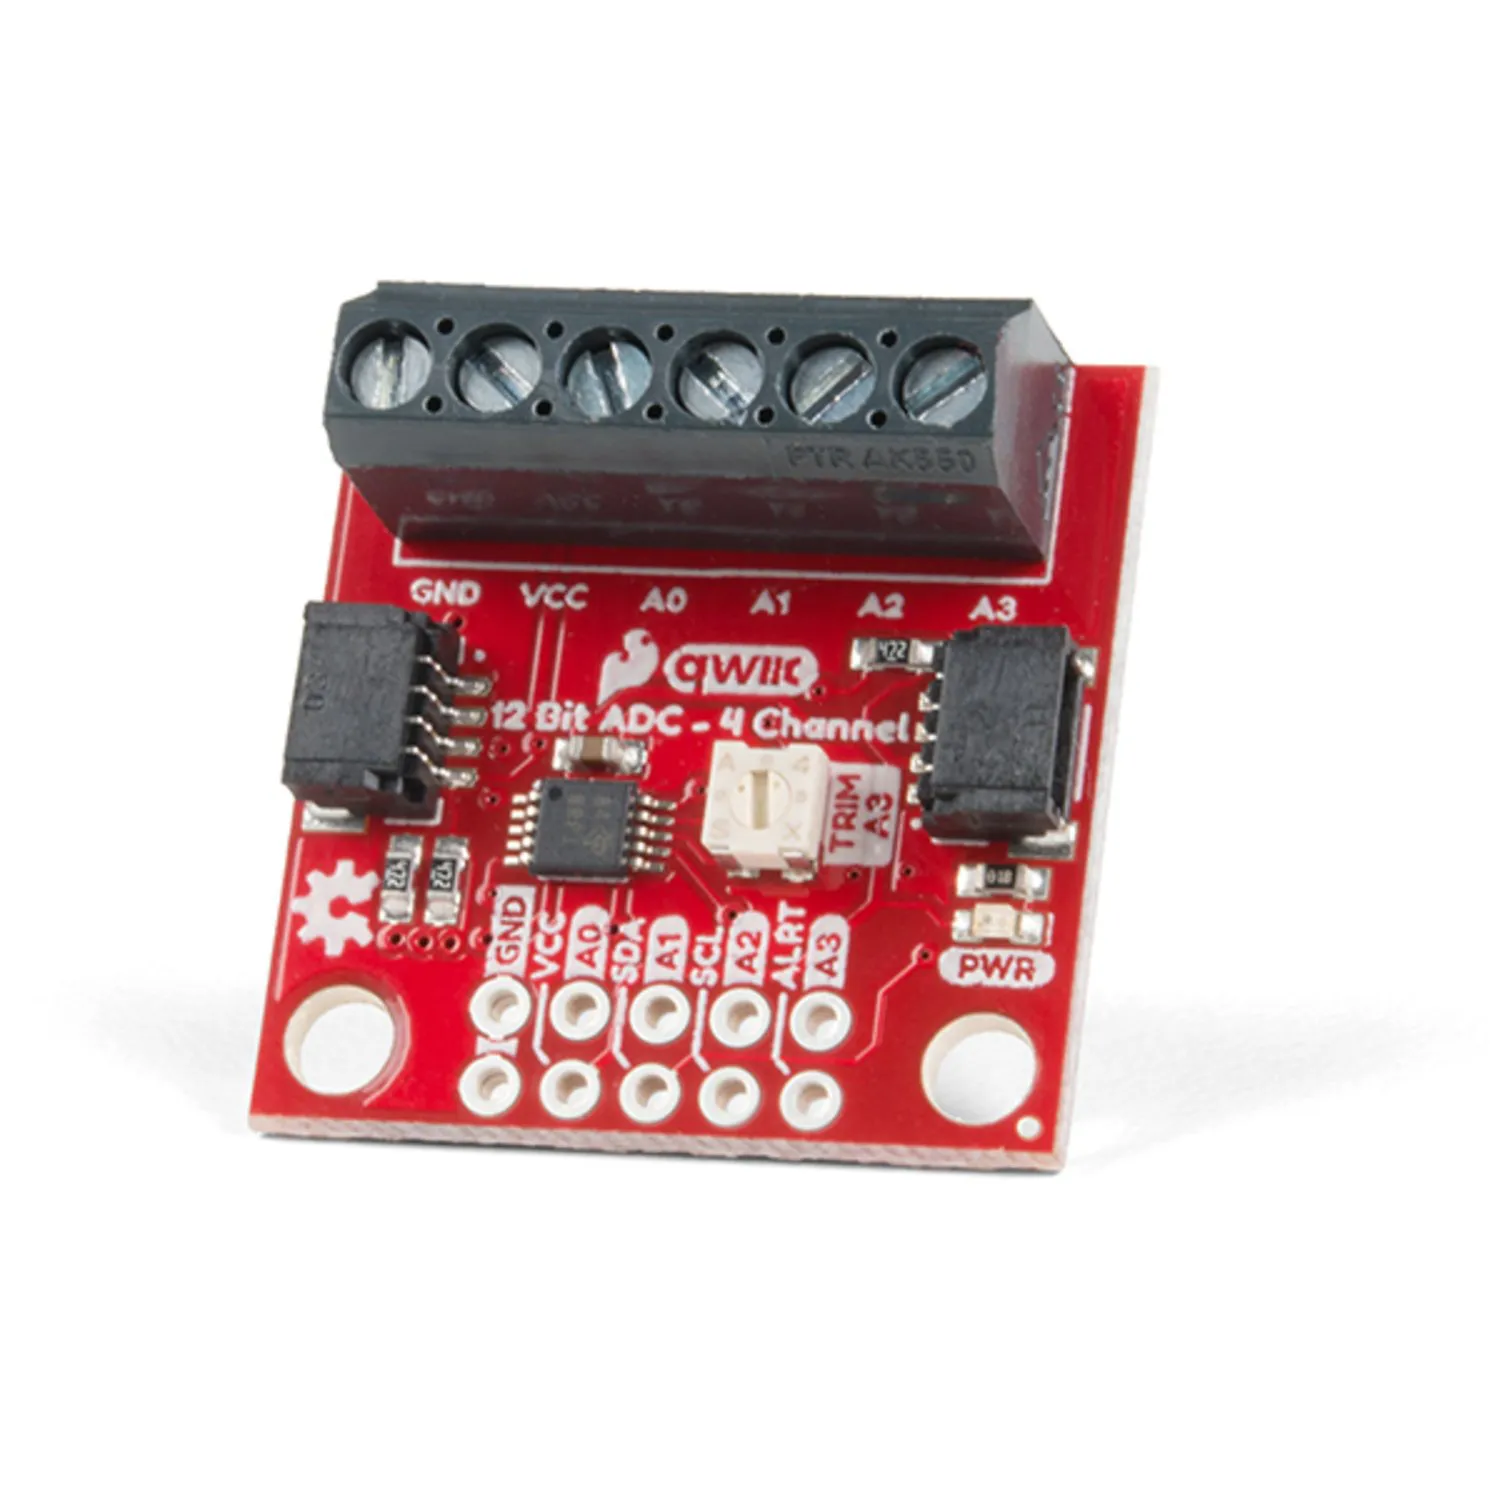 Photo of SparkFun Qwiic 12 Bit ADC - 4 Channel (ADS1015)